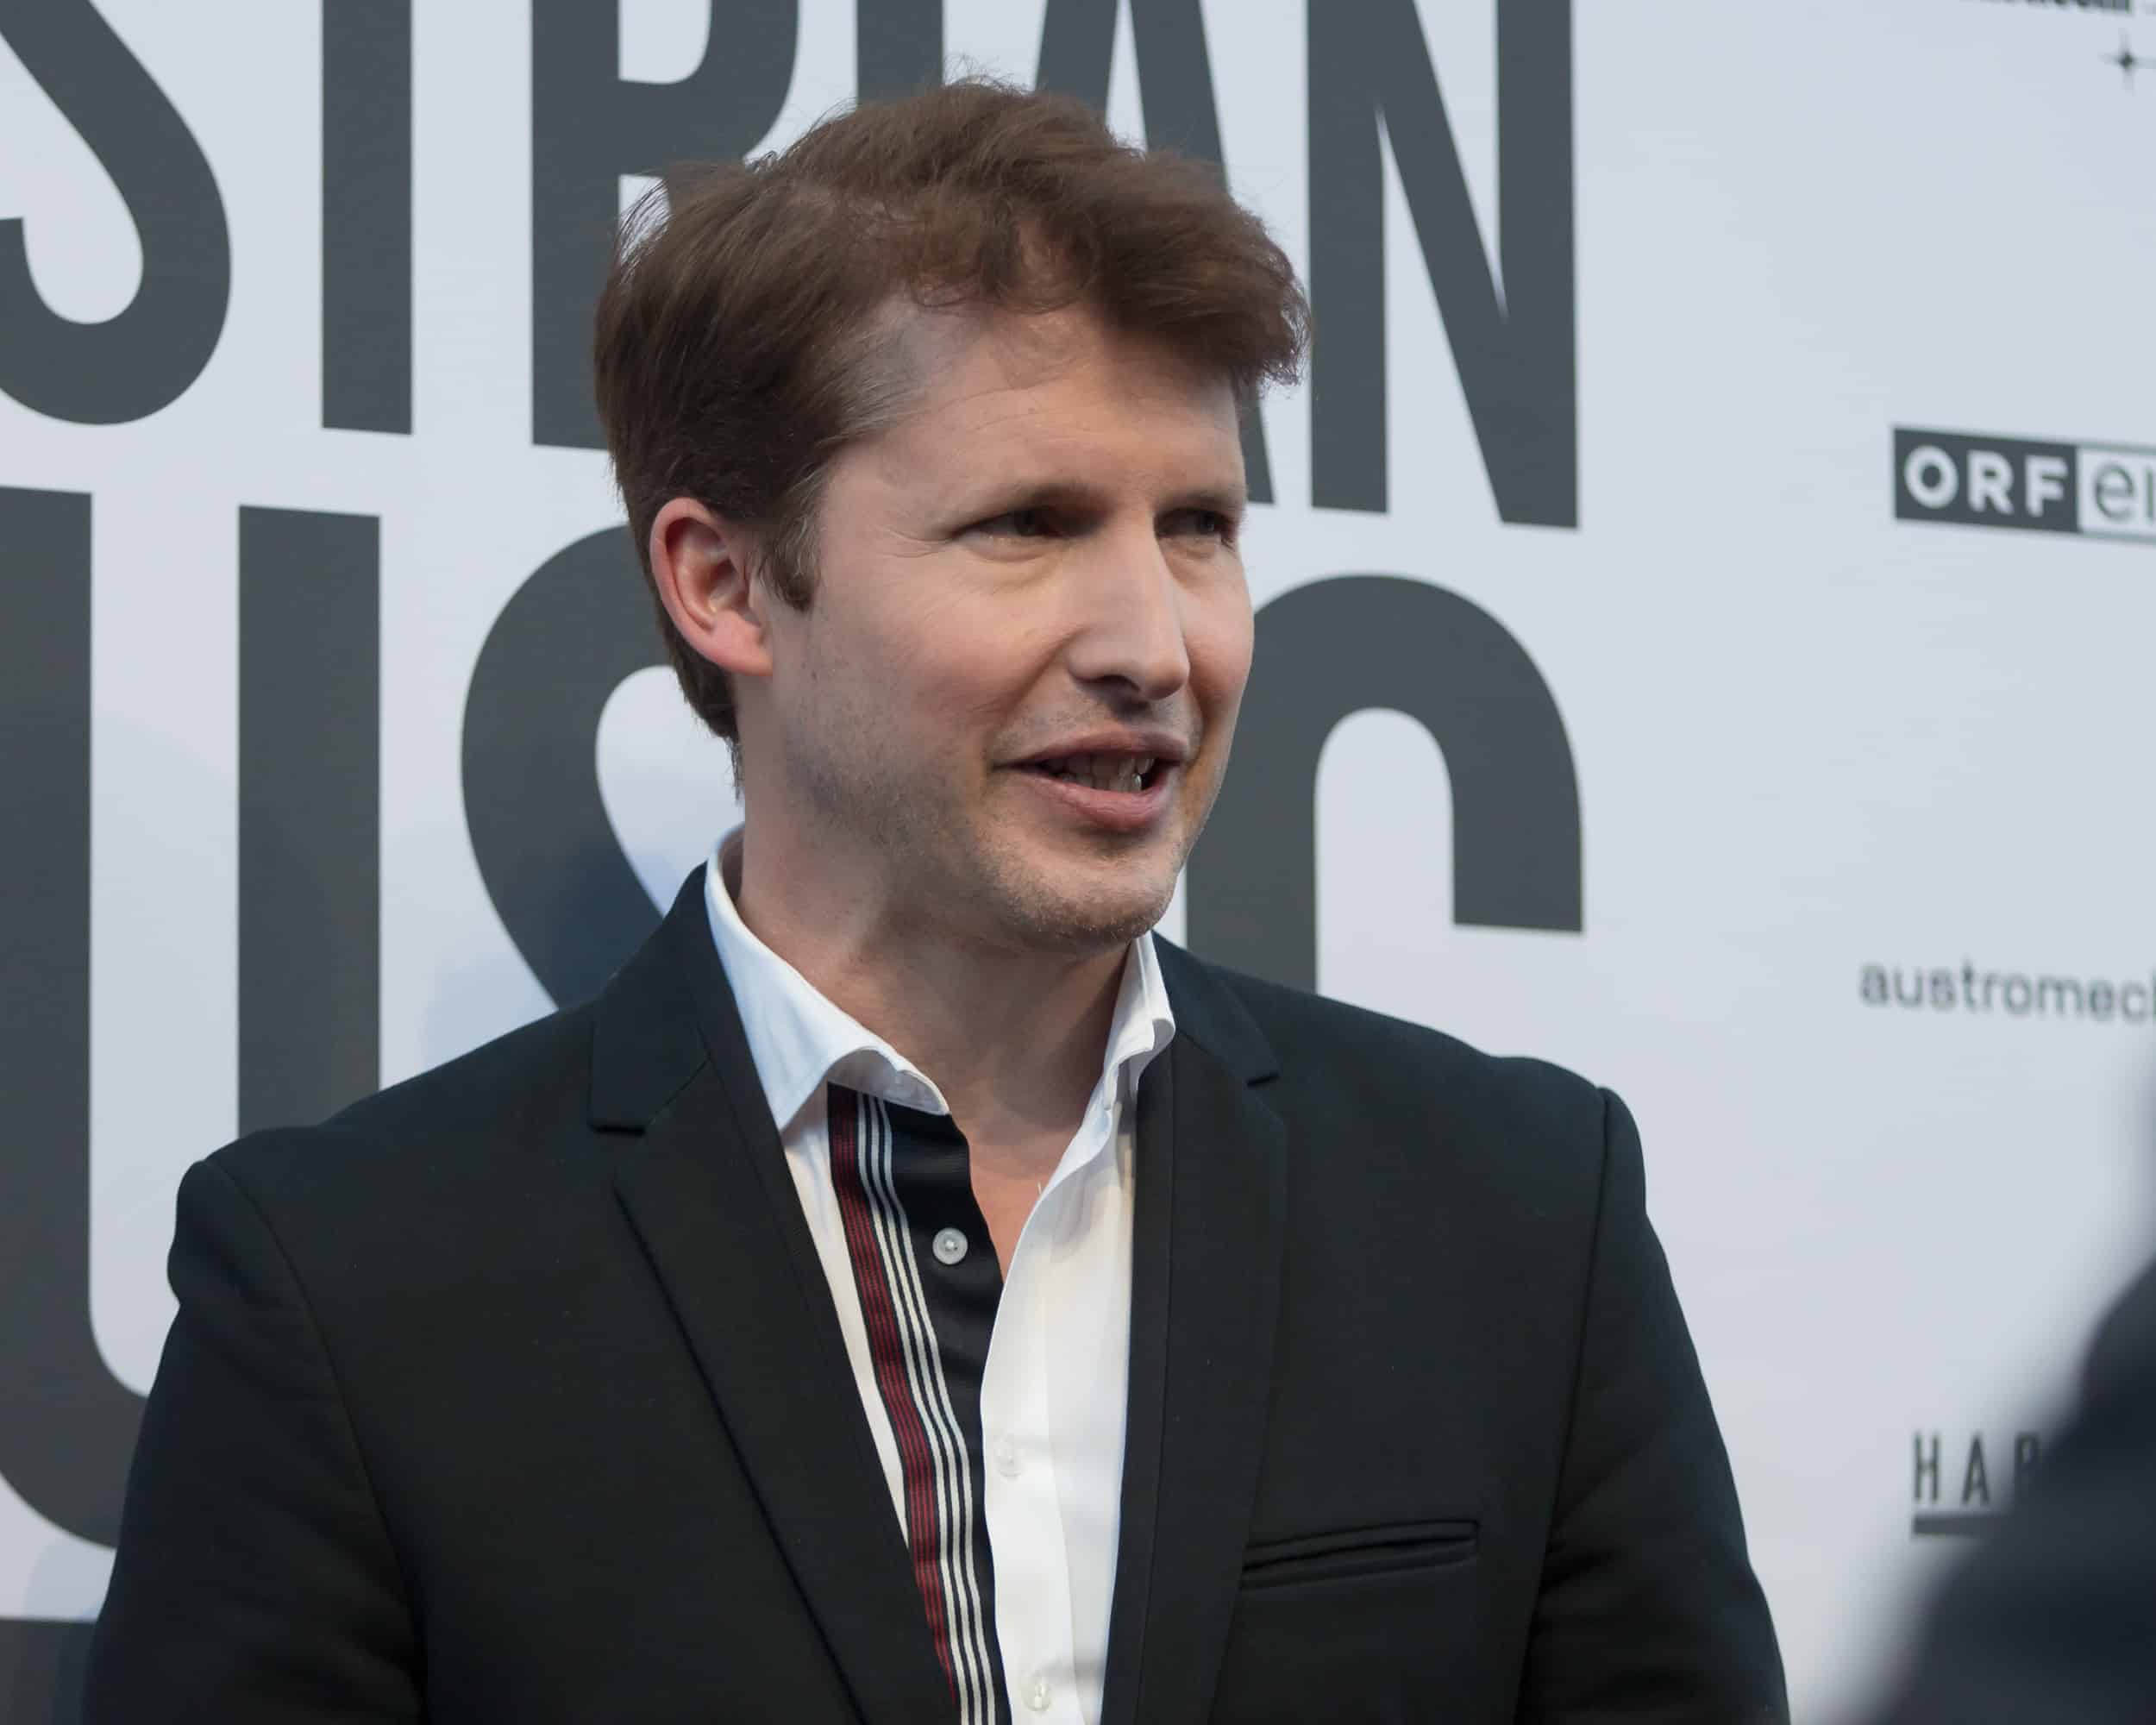 James Blunt offers help after New Zealand plays Barry Manilow to repel parliament protesters